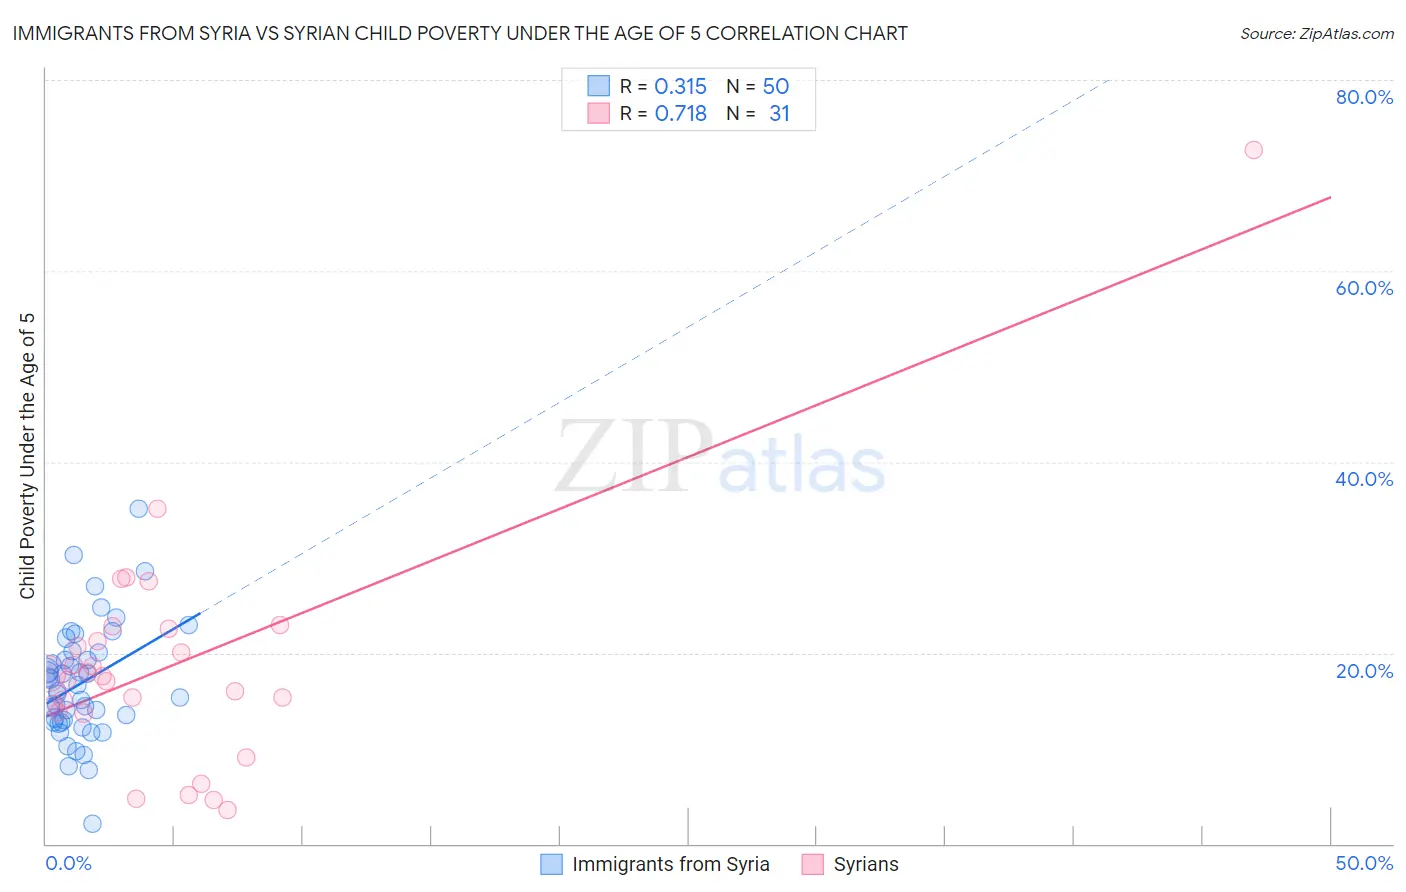 Immigrants from Syria vs Syrian Child Poverty Under the Age of 5